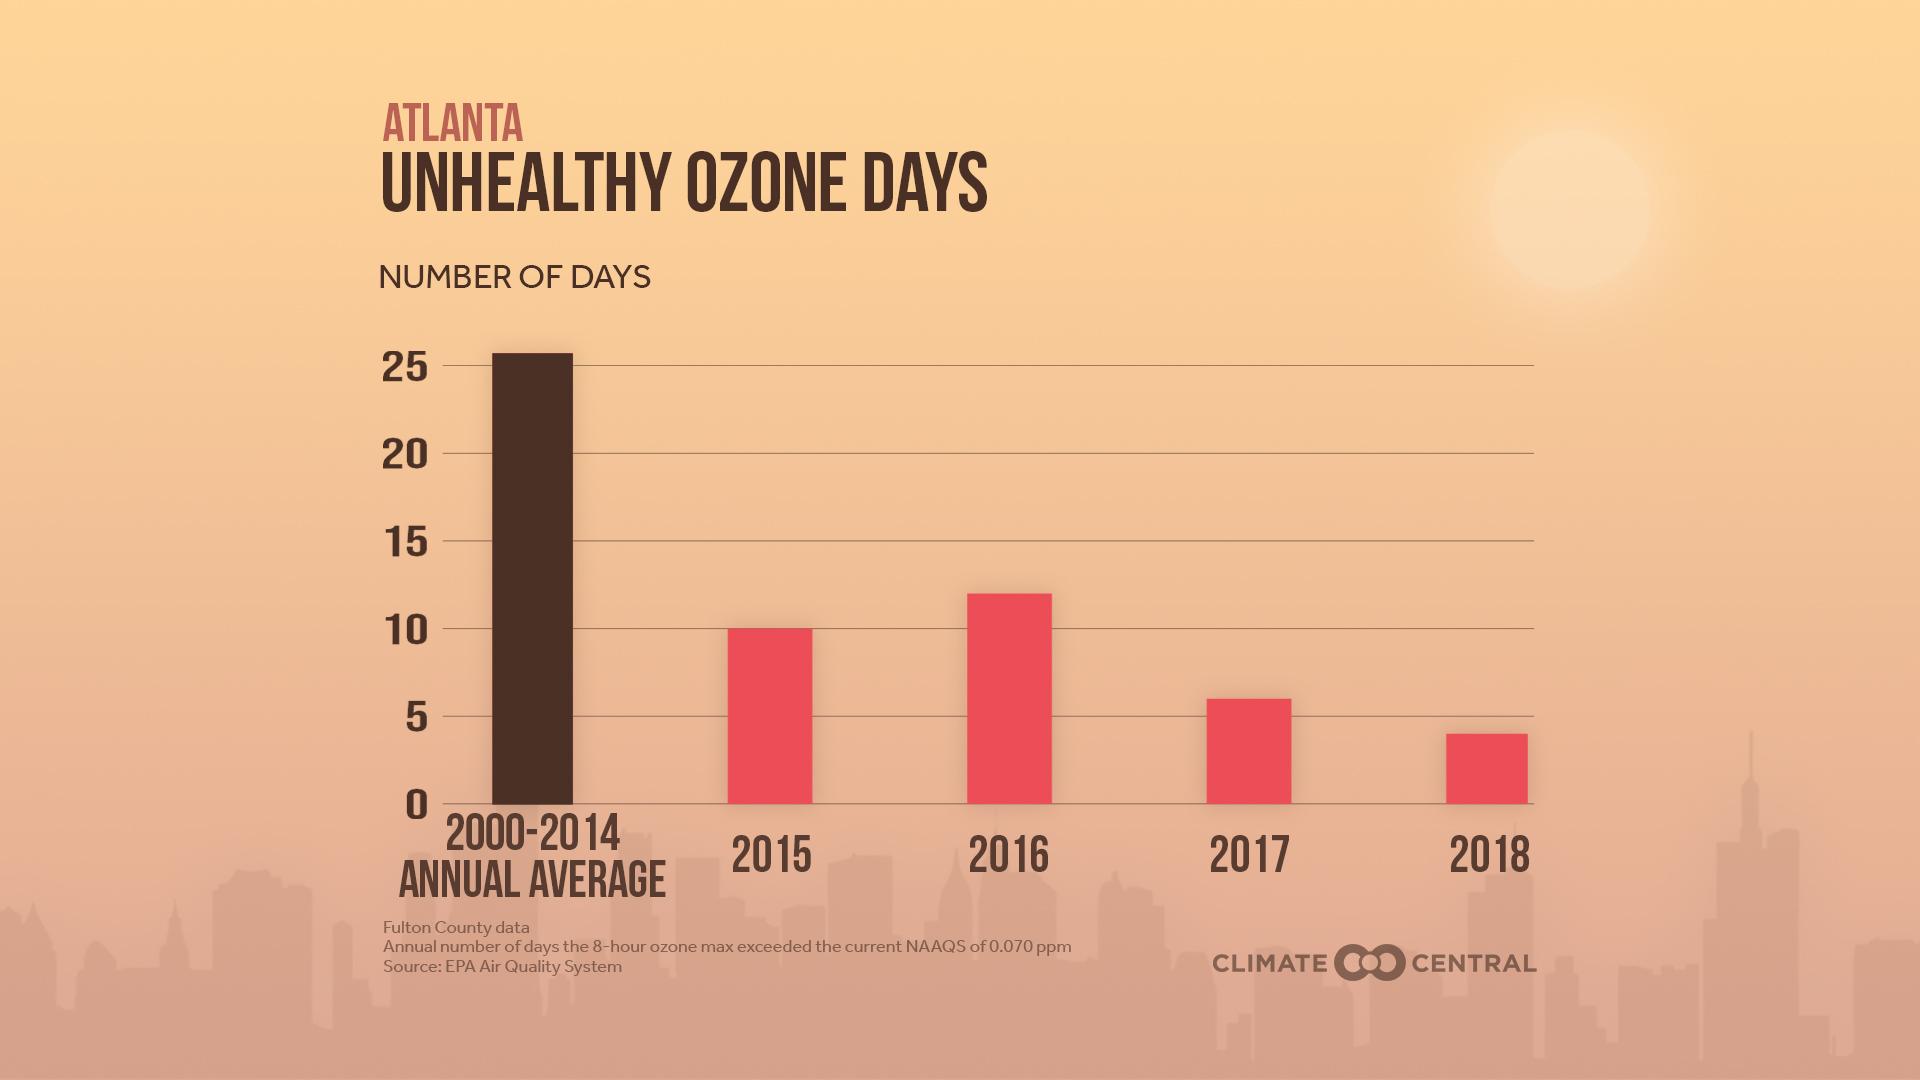 Market - Ozone Pollution: The Good, the Bad, and the Dirty